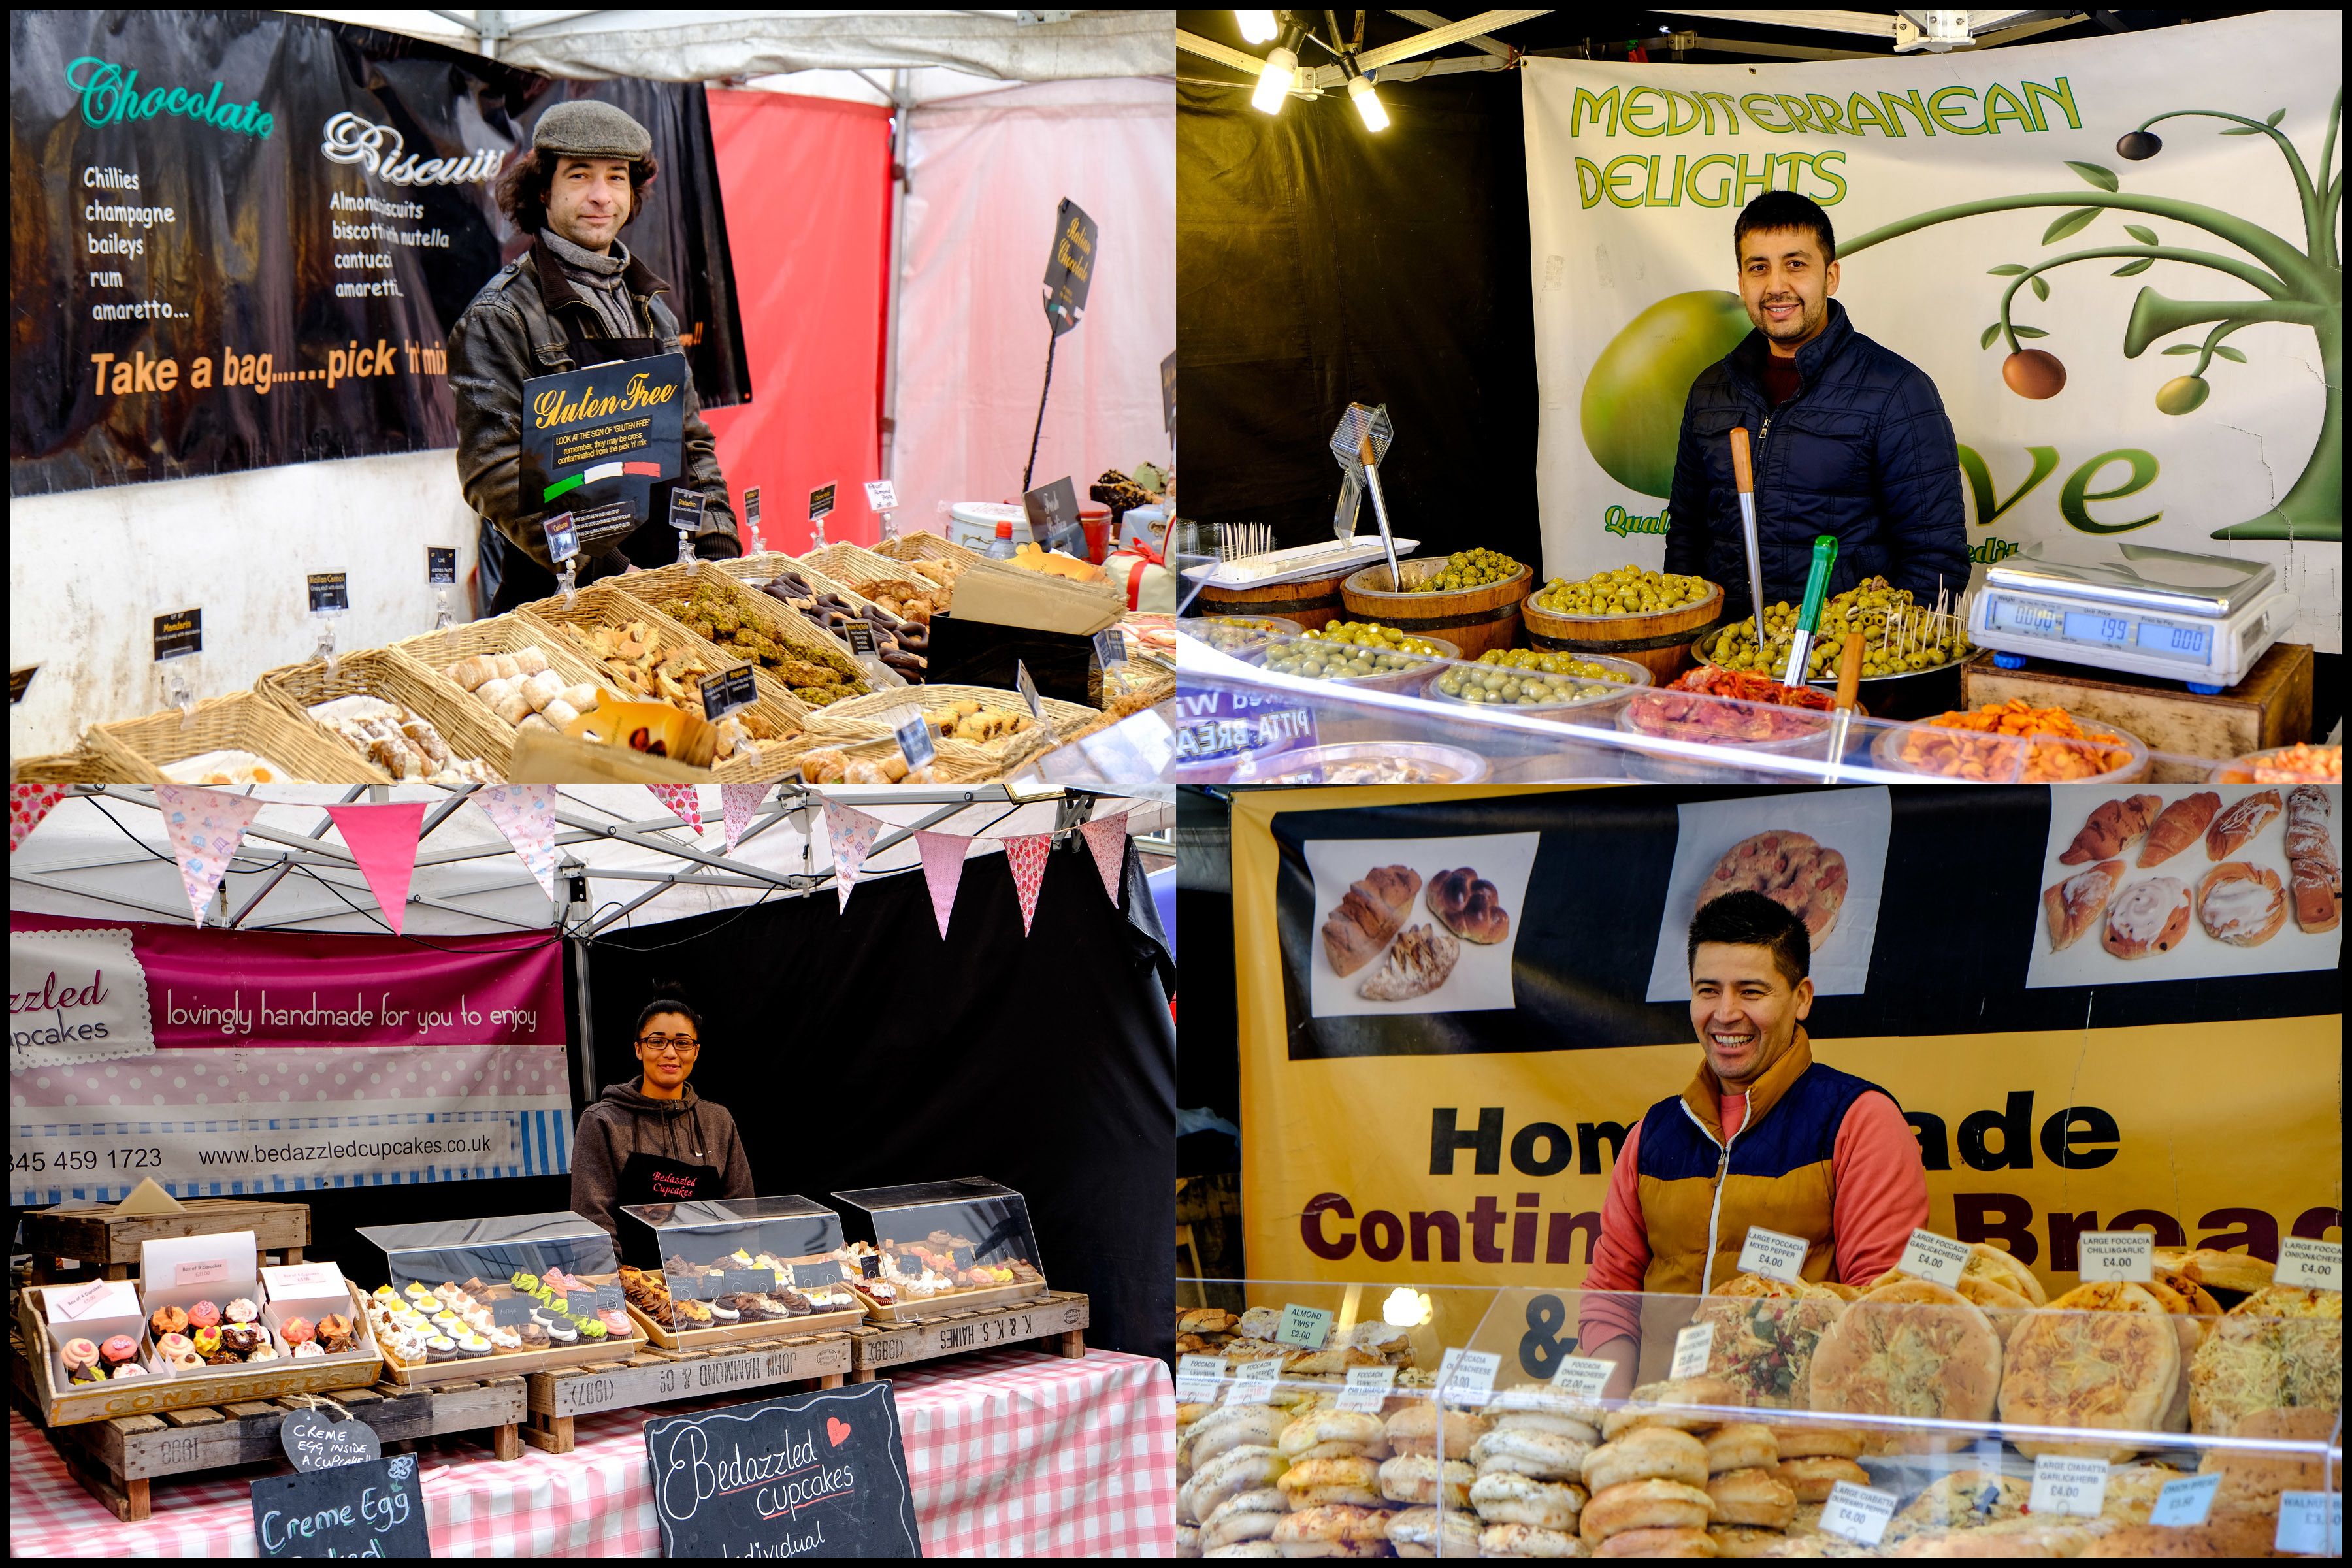 Four stall holders were happy to smile for the camera during the Wigan Food Festival held in the town centre.